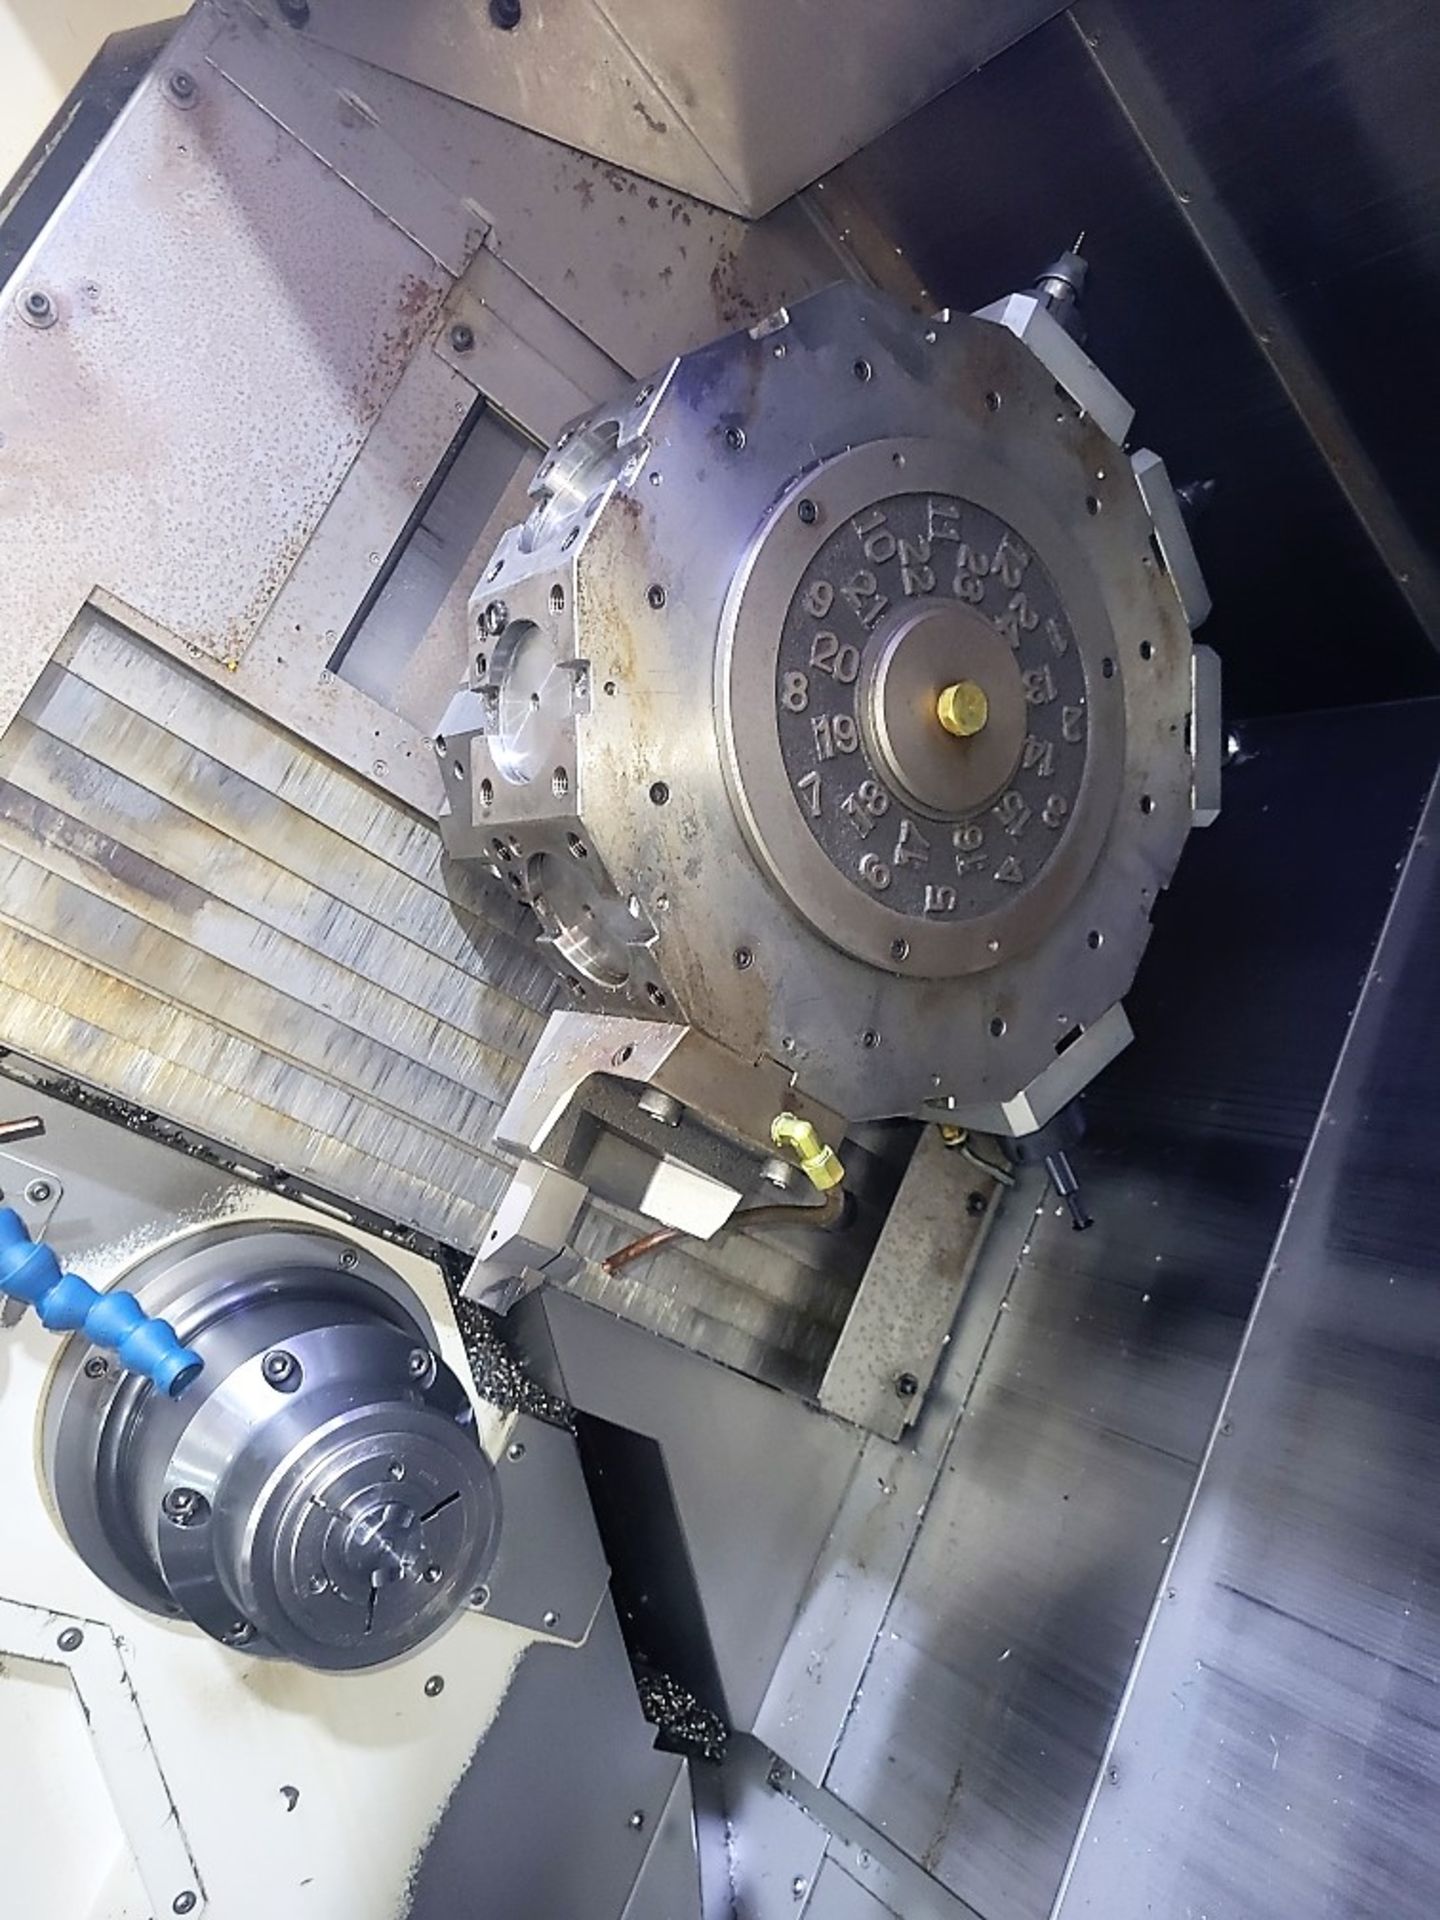 2011 Nakamura Tome WT-300 8-Axis CNC Turning/Milling Center, S/N M302803 - Image 8 of 18